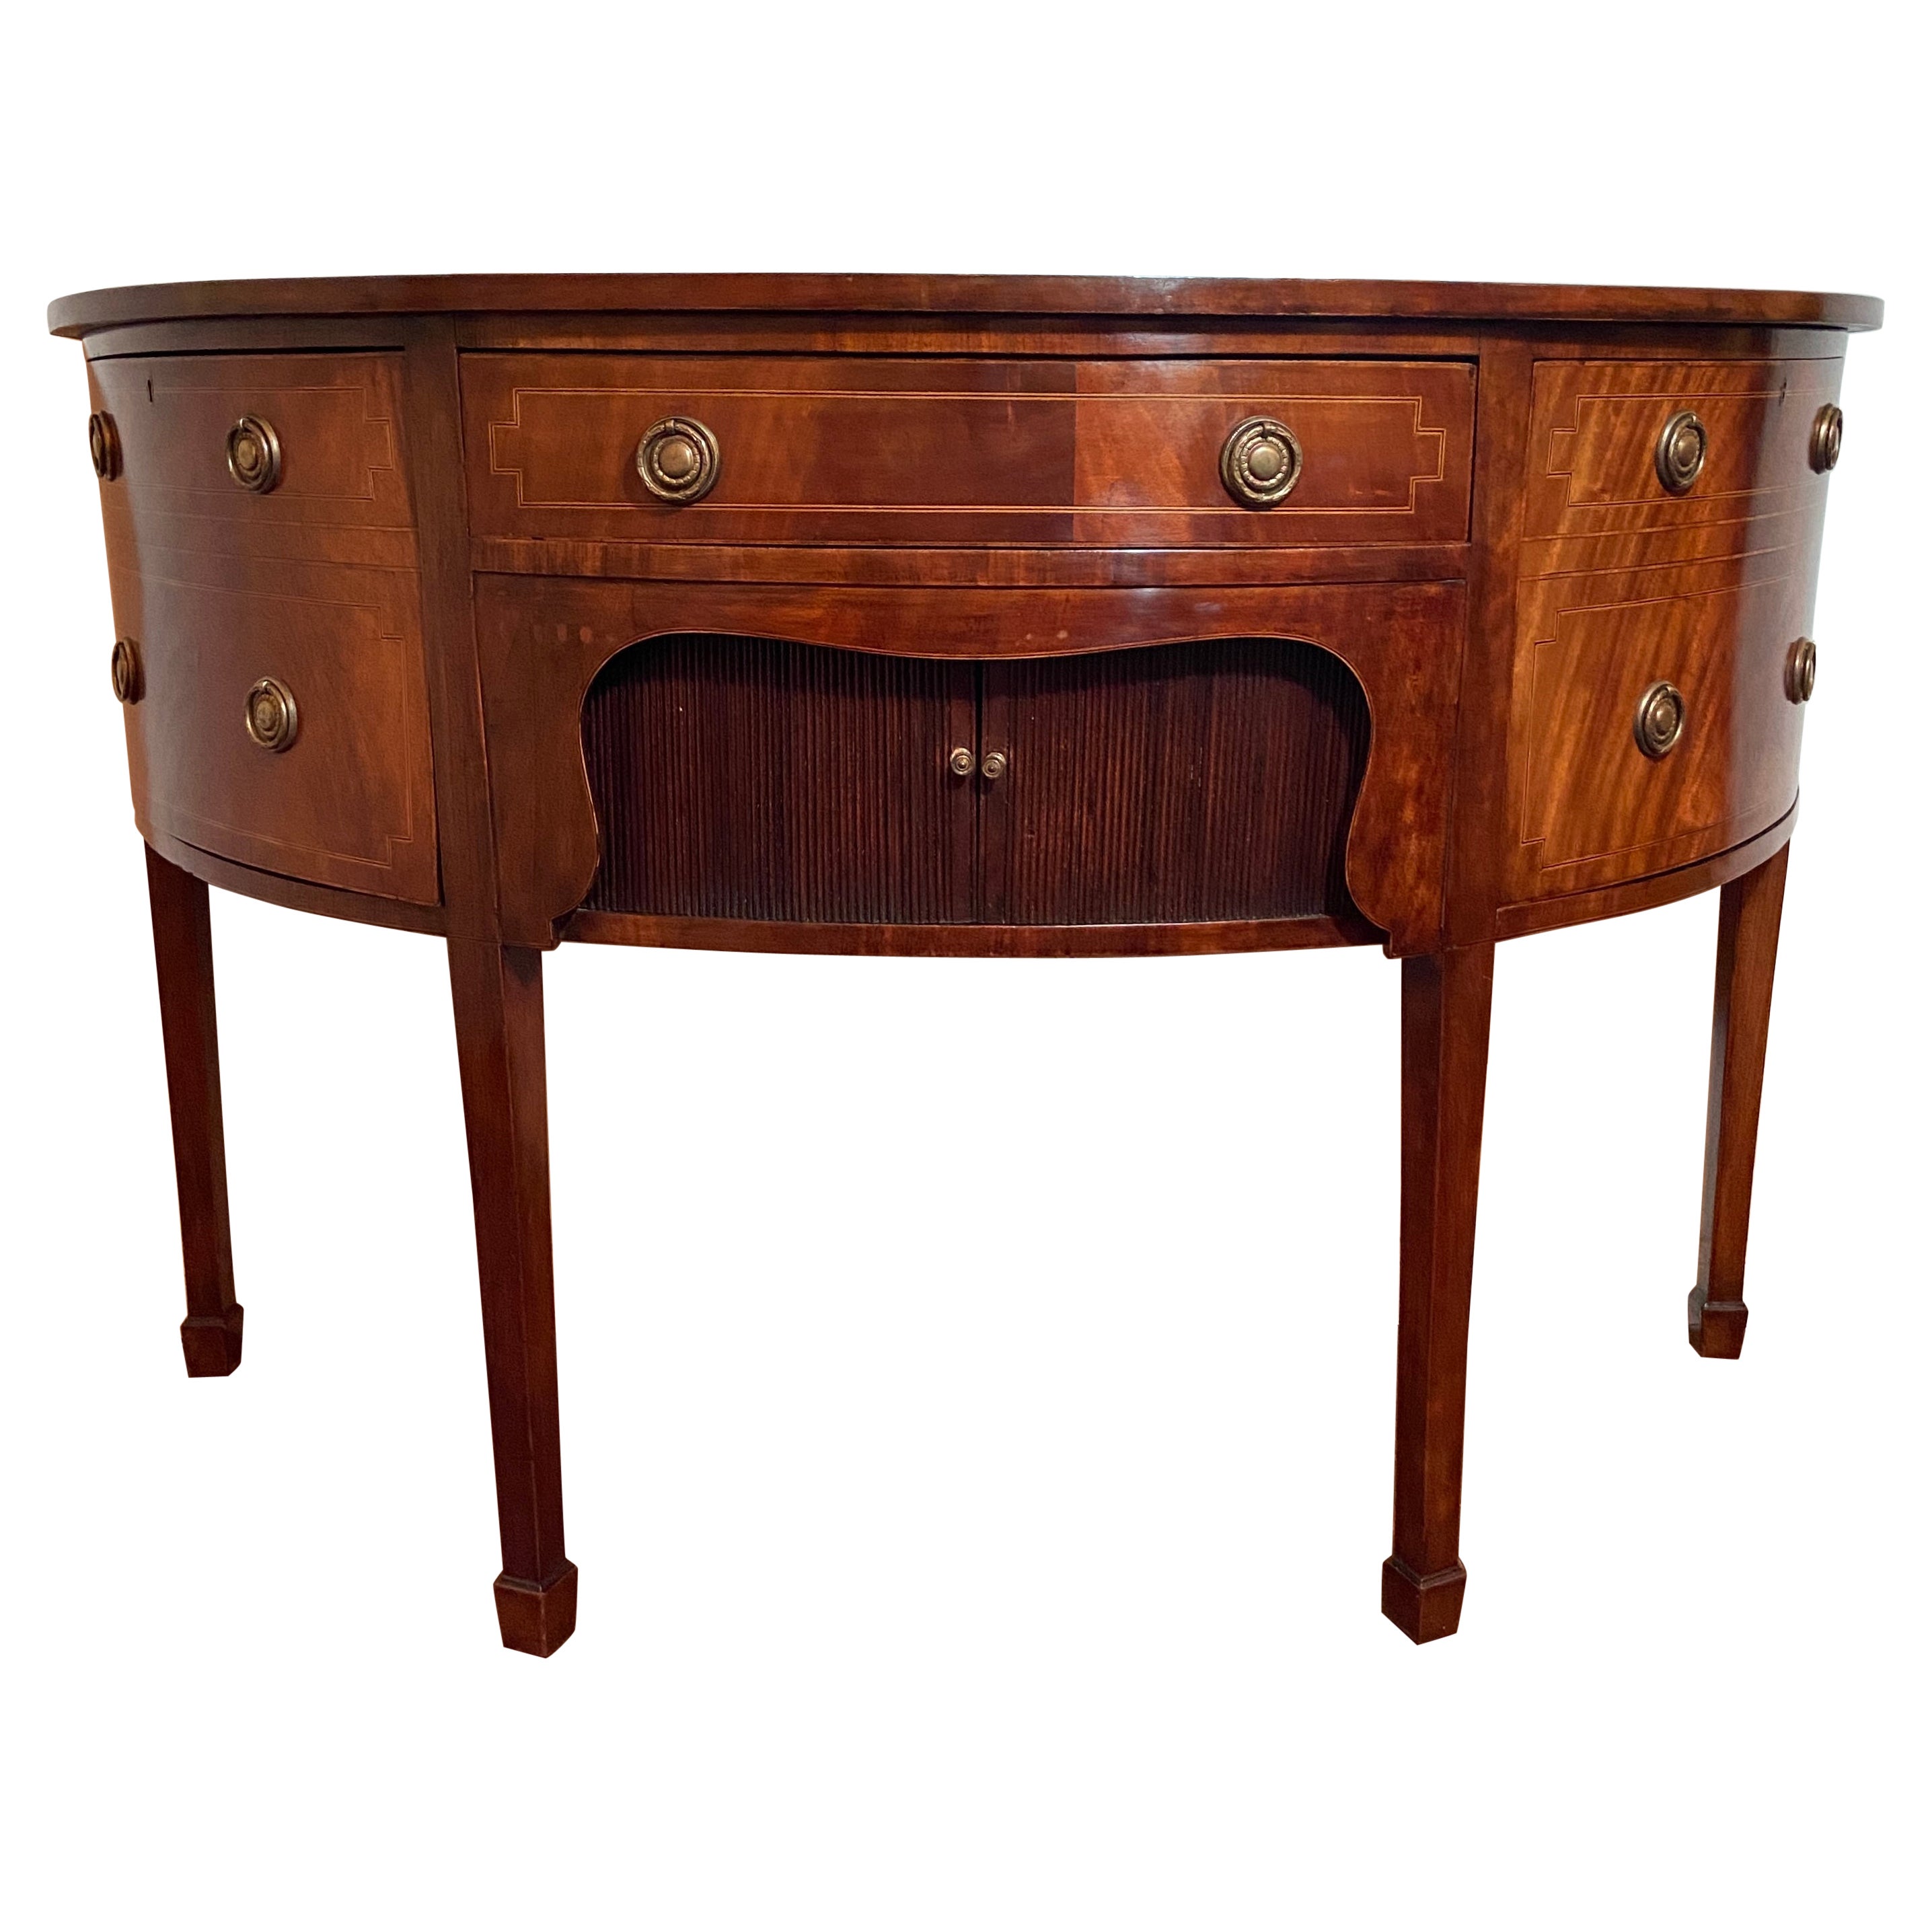 Antique 19th Century English Mahogany Demi-Lune Sideboard For Sale